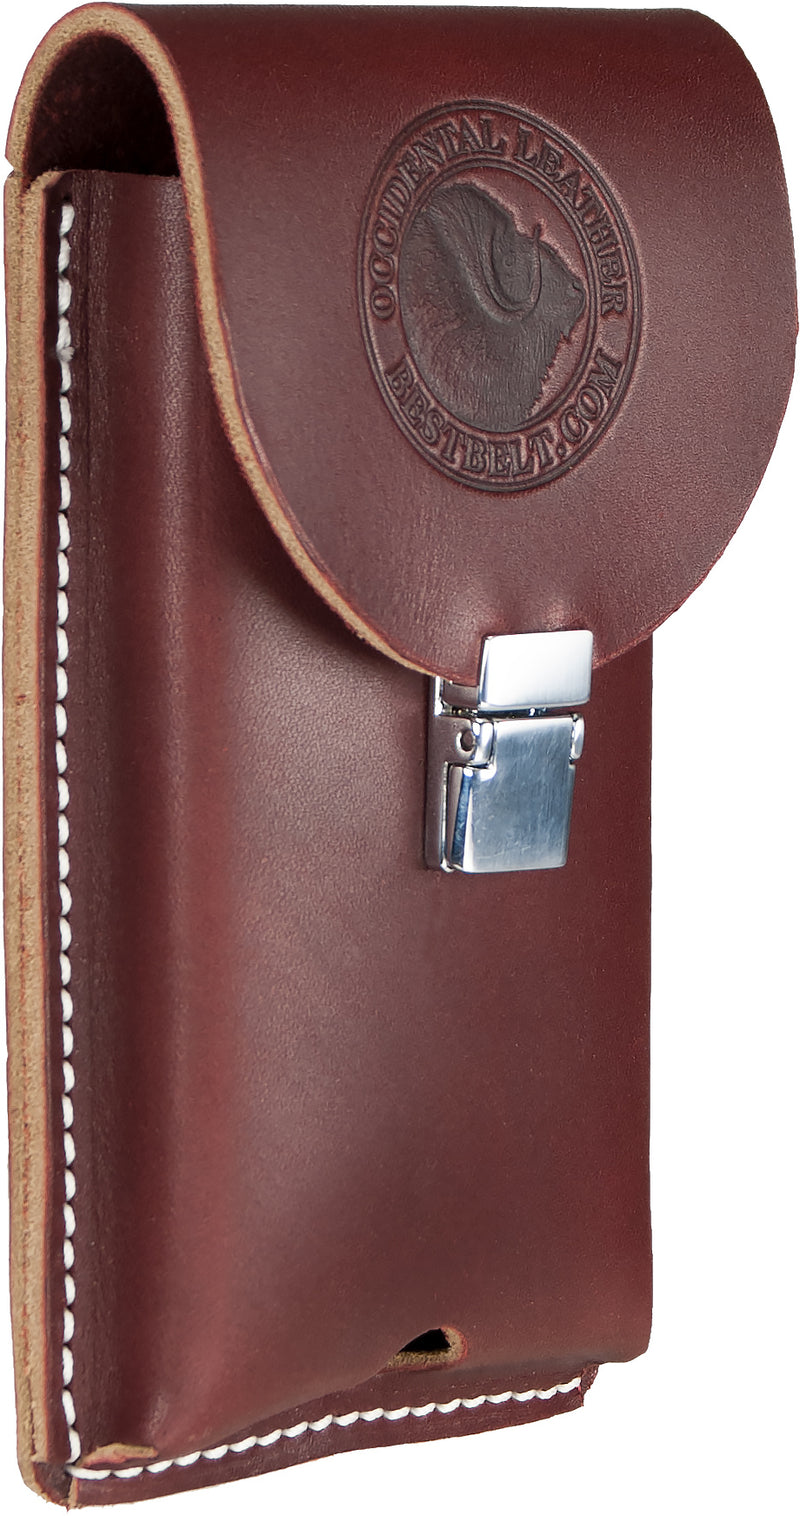 Occidental Leather Clip-On Phone Holster